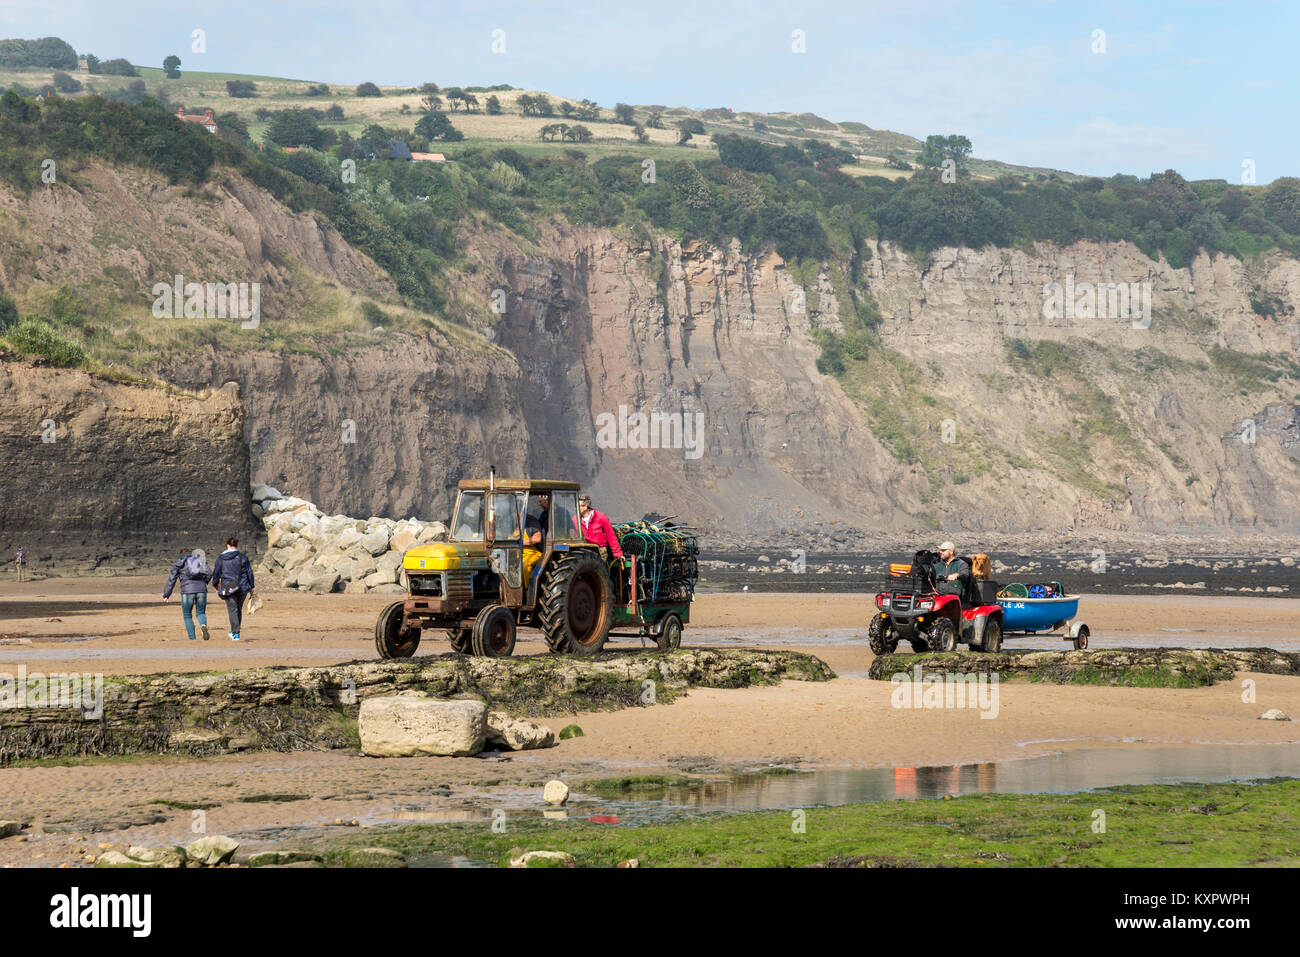 Tractor bringing in Lobster pots ahead of a quad bike and small boat on the beach at Robin Hood's Bay, North Yorkshire, England. Stock Photo